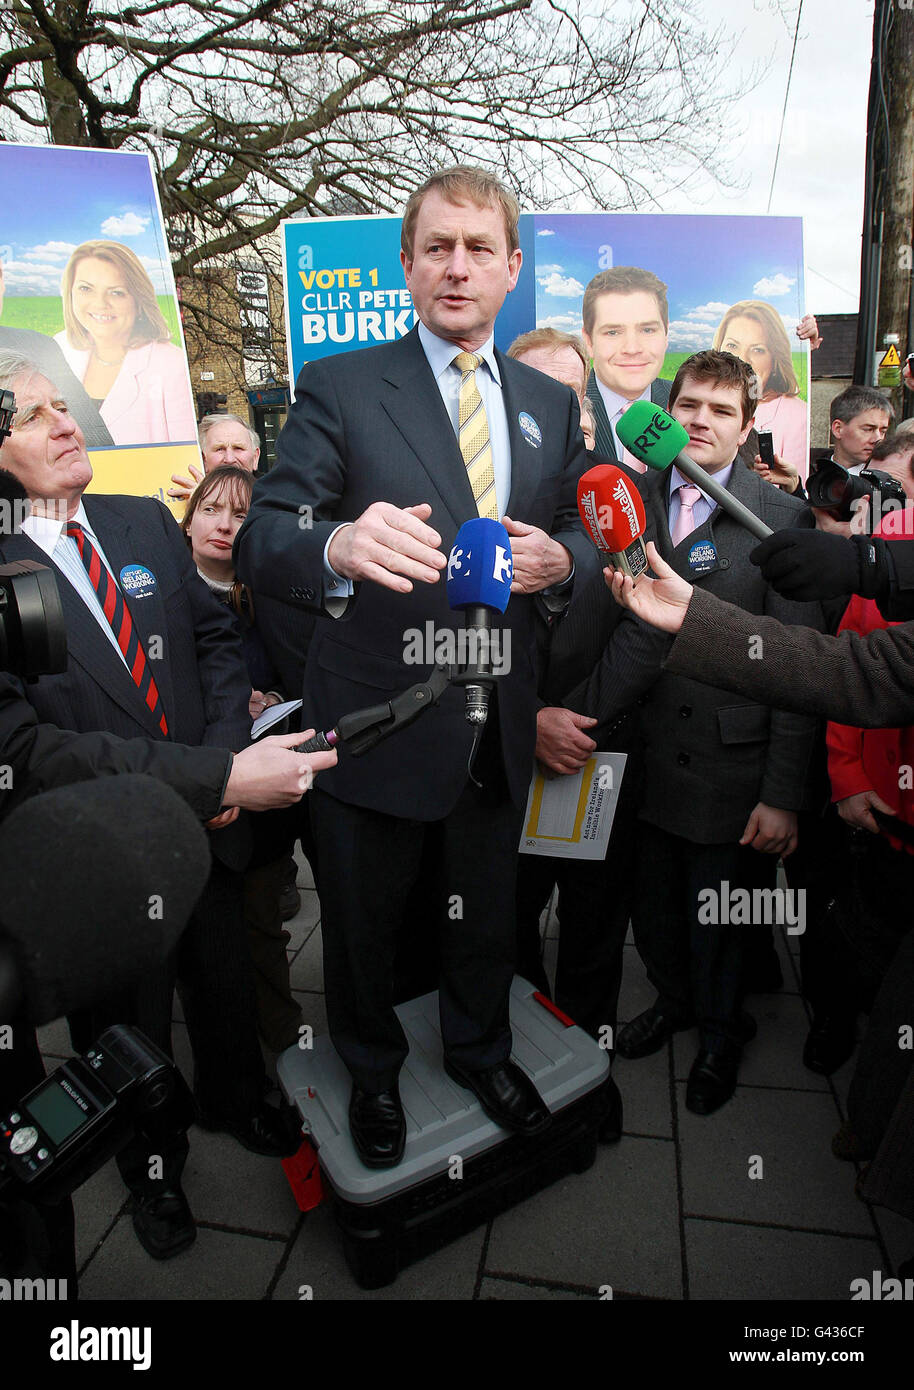 Fine Gael Leader Enda Kenny makes a speech on a stump in Mullingar during his canvassing tour of Mid Ireland. Stock Photo